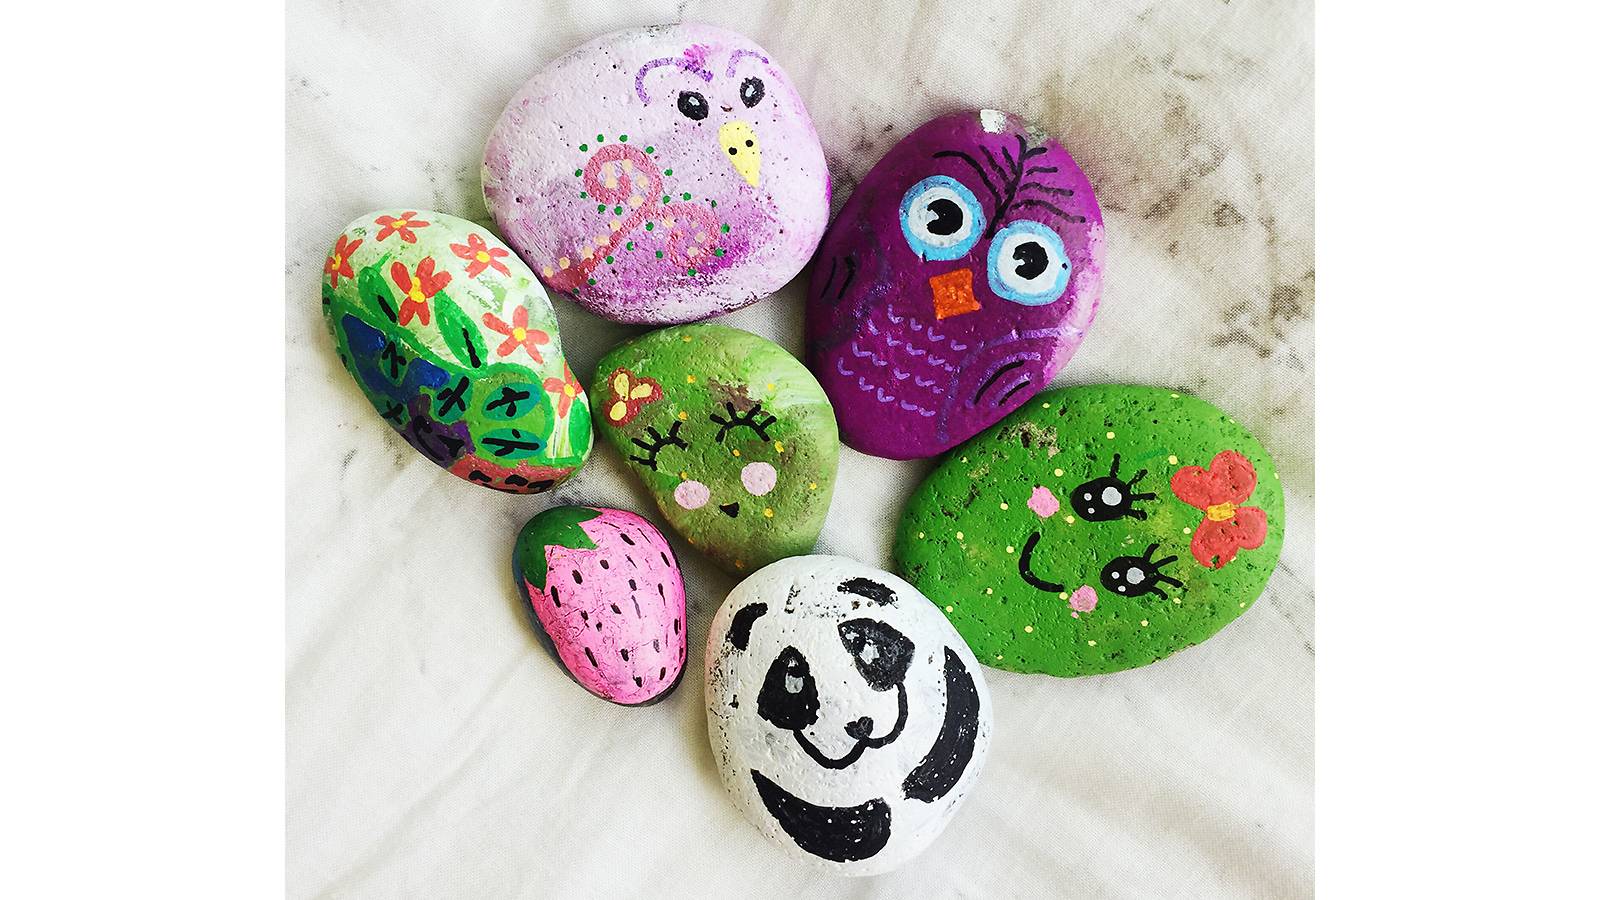 Kids-MUM-SAYS-We-hide-rocks-for-other-kids-to-find-r1